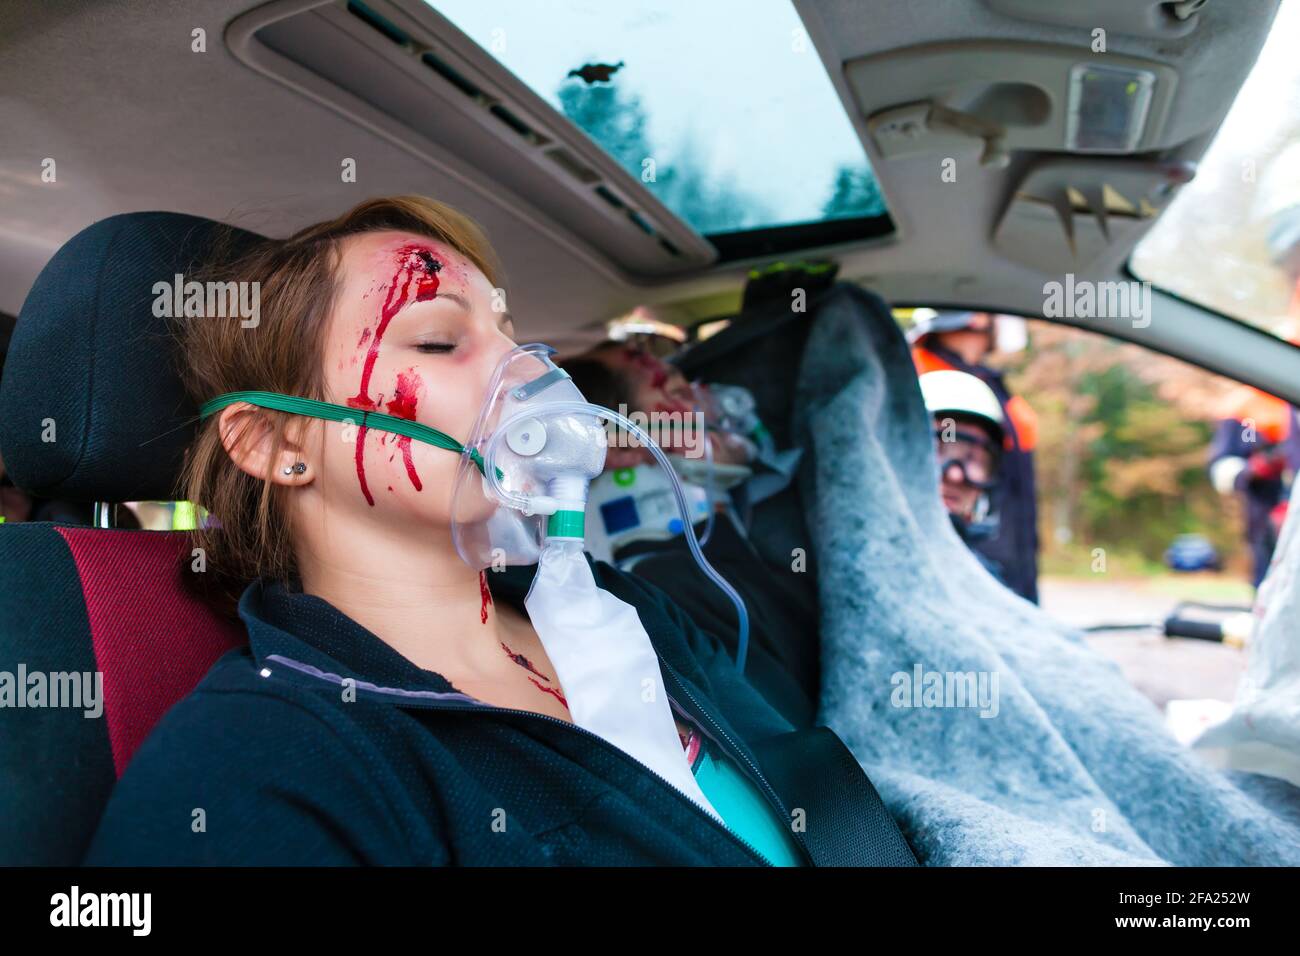 Accident - victim in a crashed vehicle, she receives medical first aid from firefighters Stock Photo